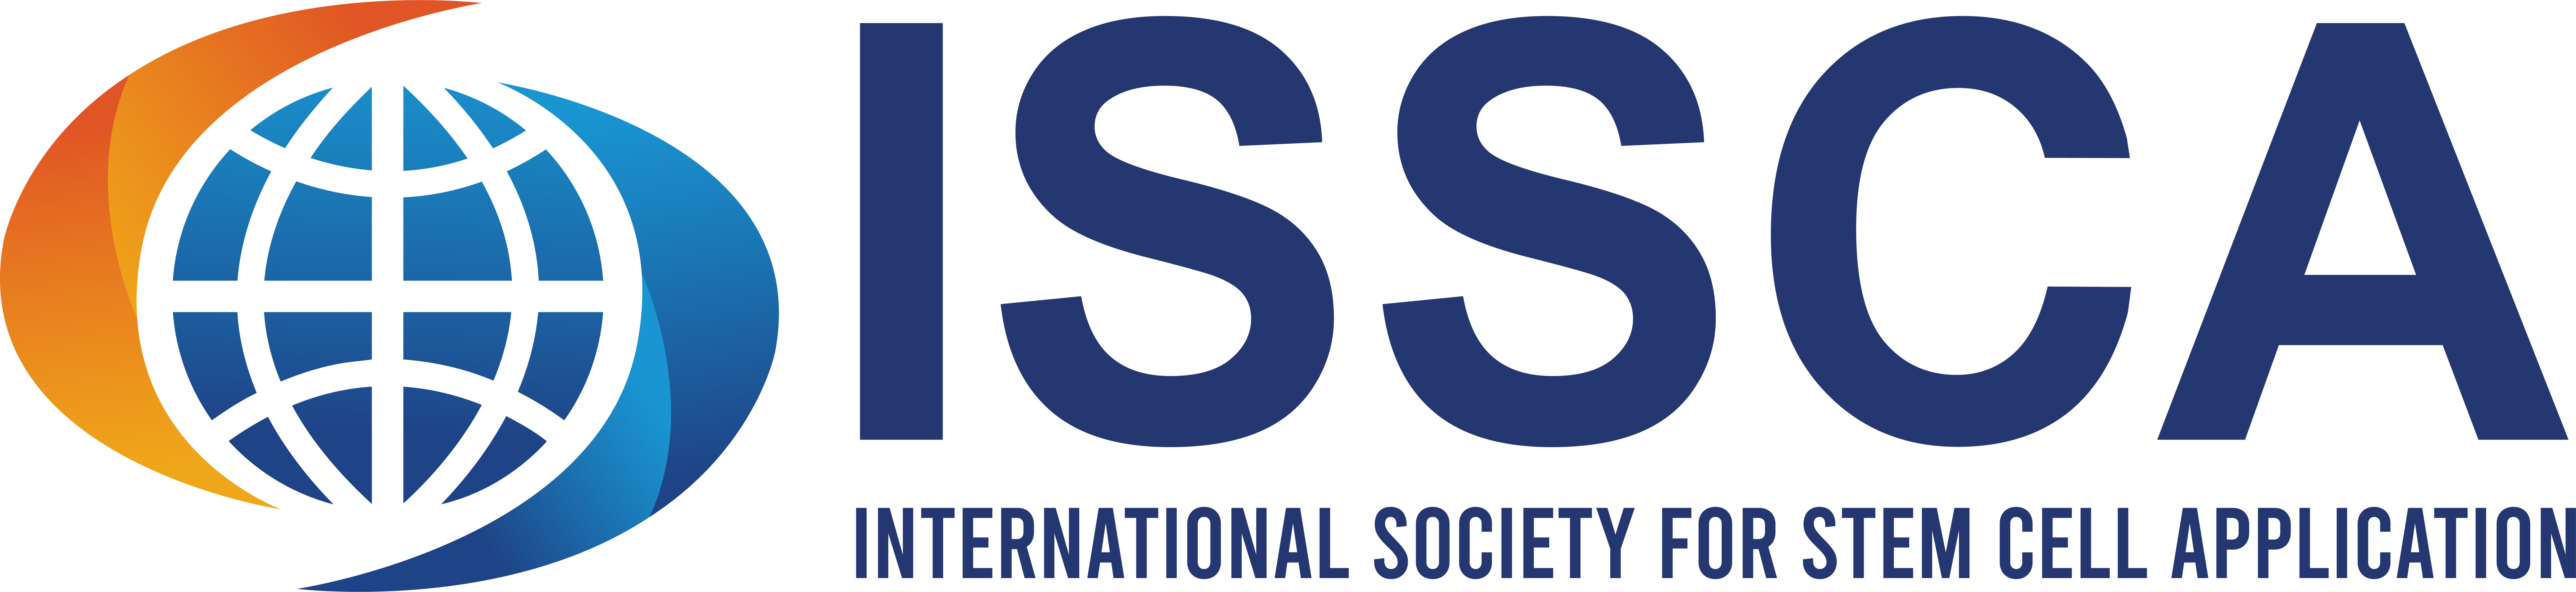 ISSCA to Host Regenerative Medicine Conference in Cancun, Mexico